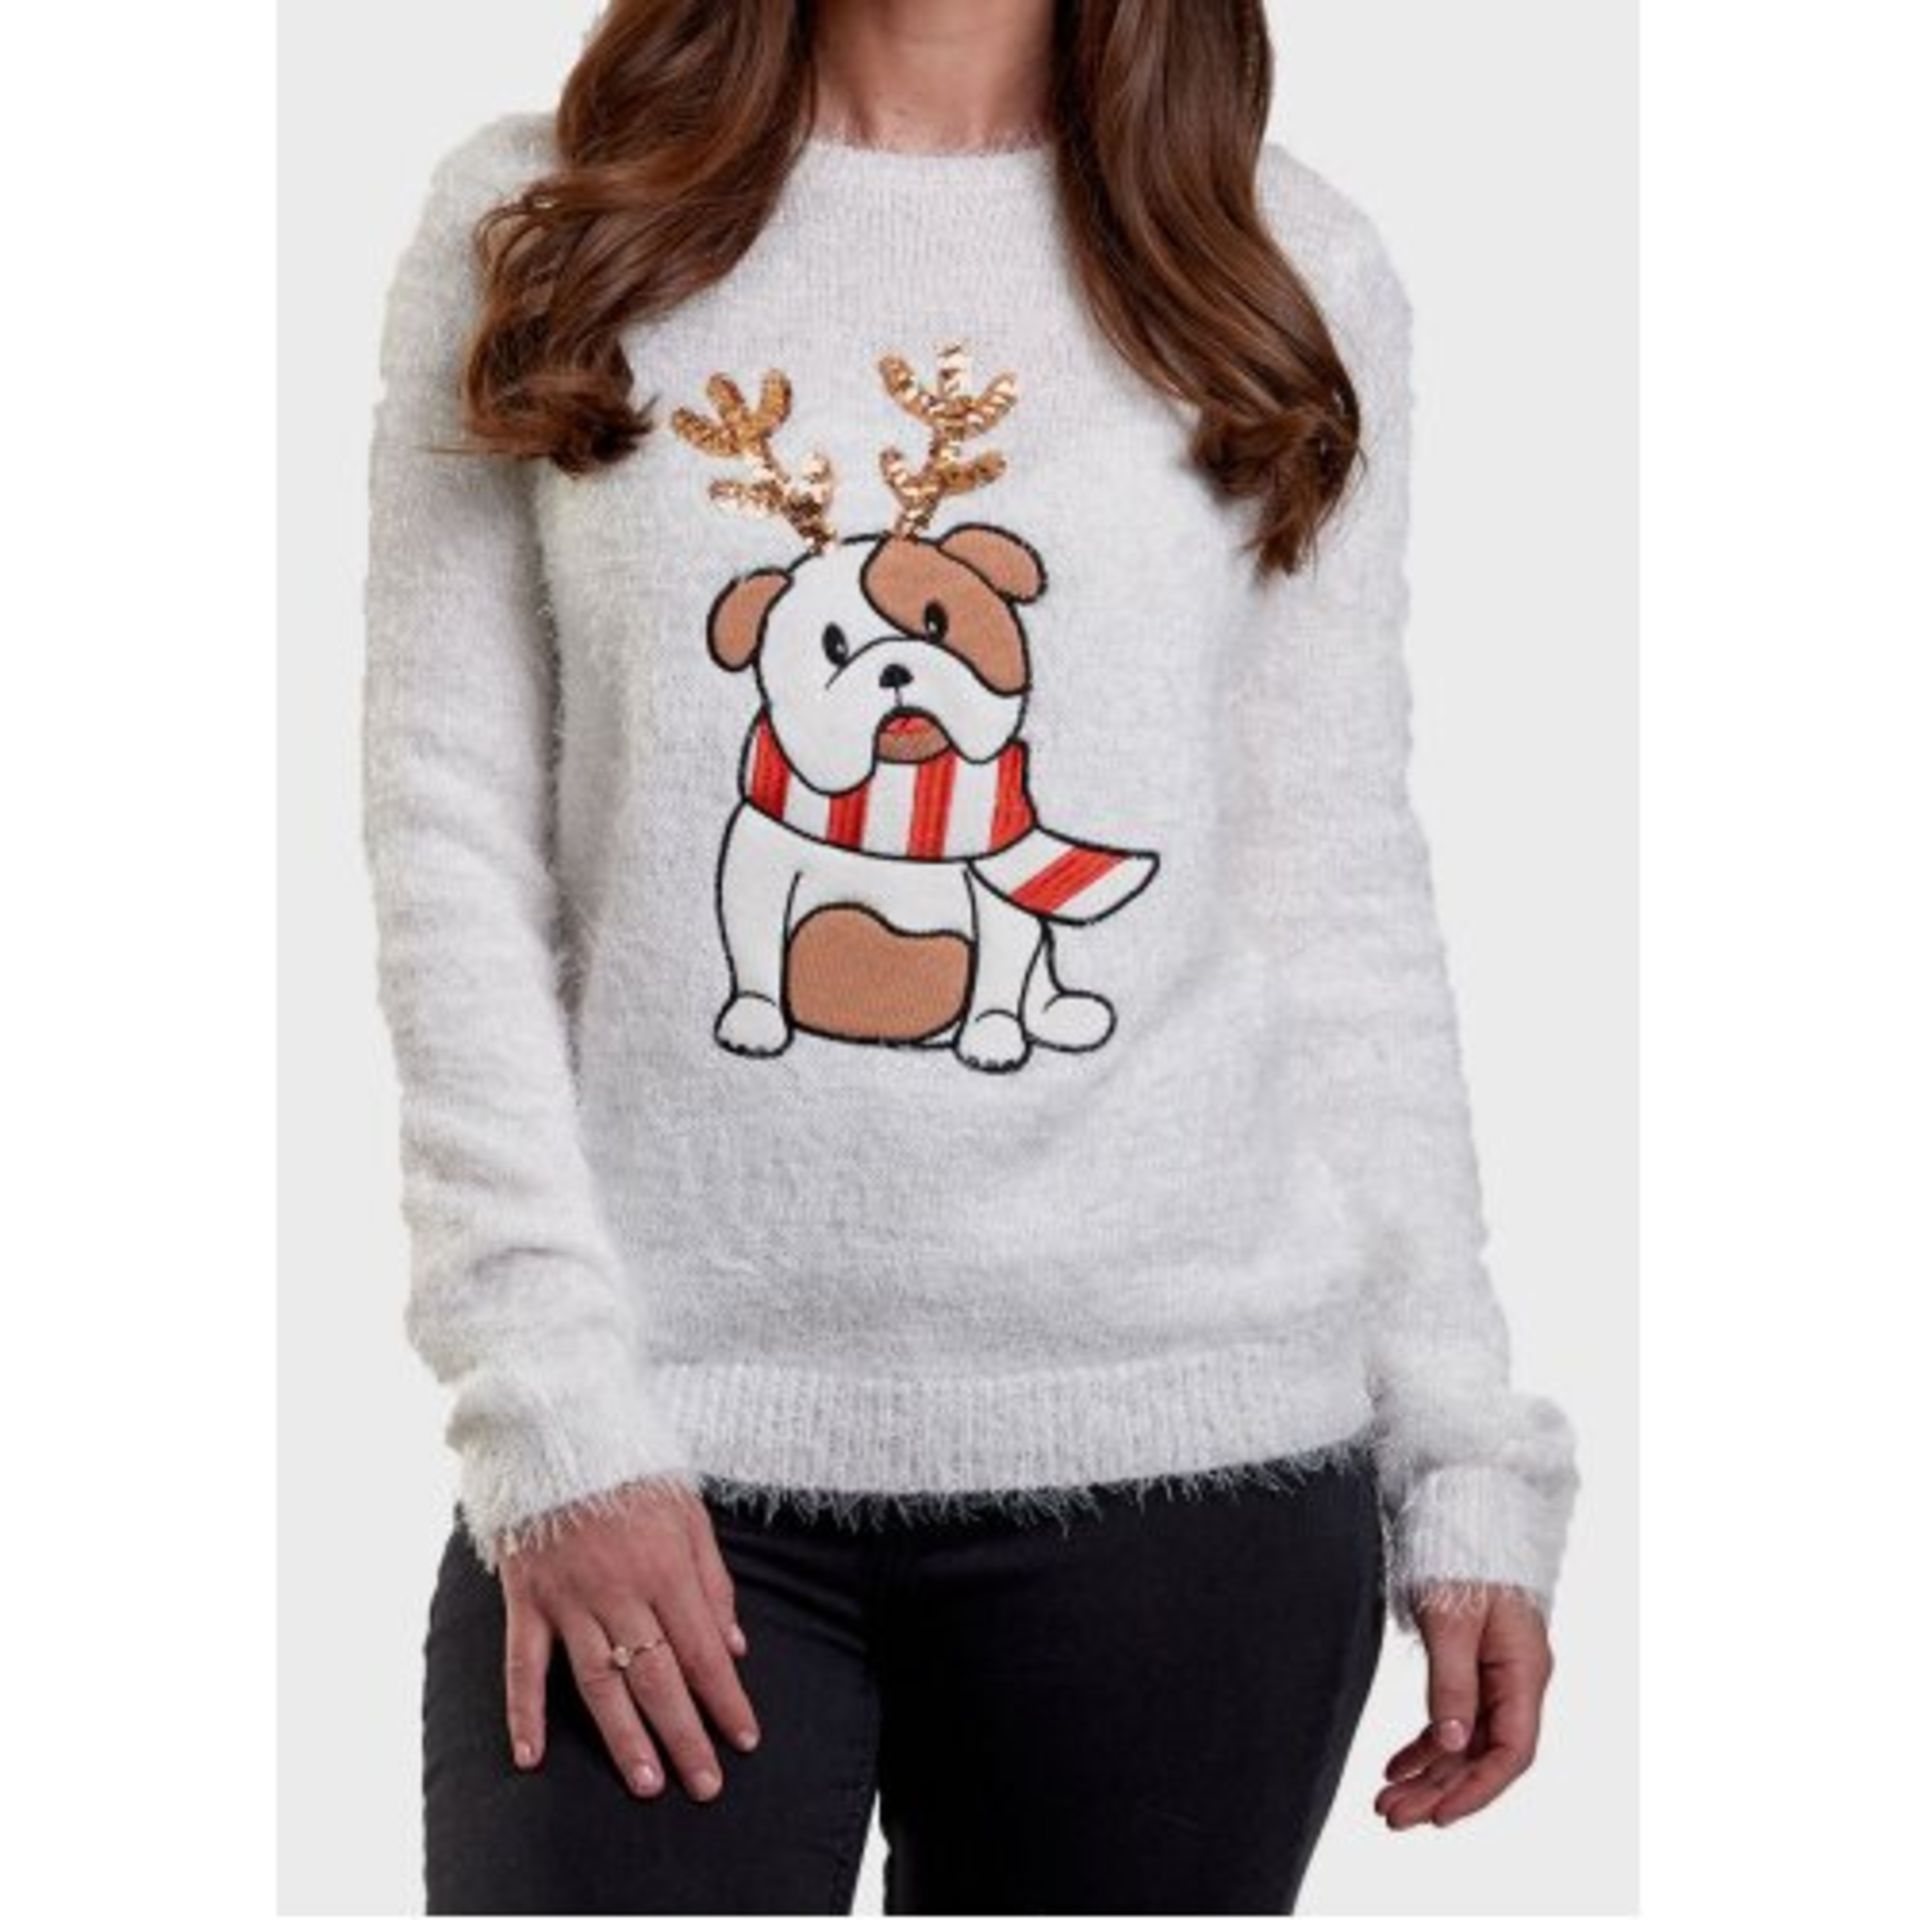 25 X BRAND NEW NOVELTY FESTIVE JUMPERS IE. FLUFFY SEQUINED BULLDOG RED (UK16 - 6), CREAM (UK 16 - 9, - Image 2 of 2